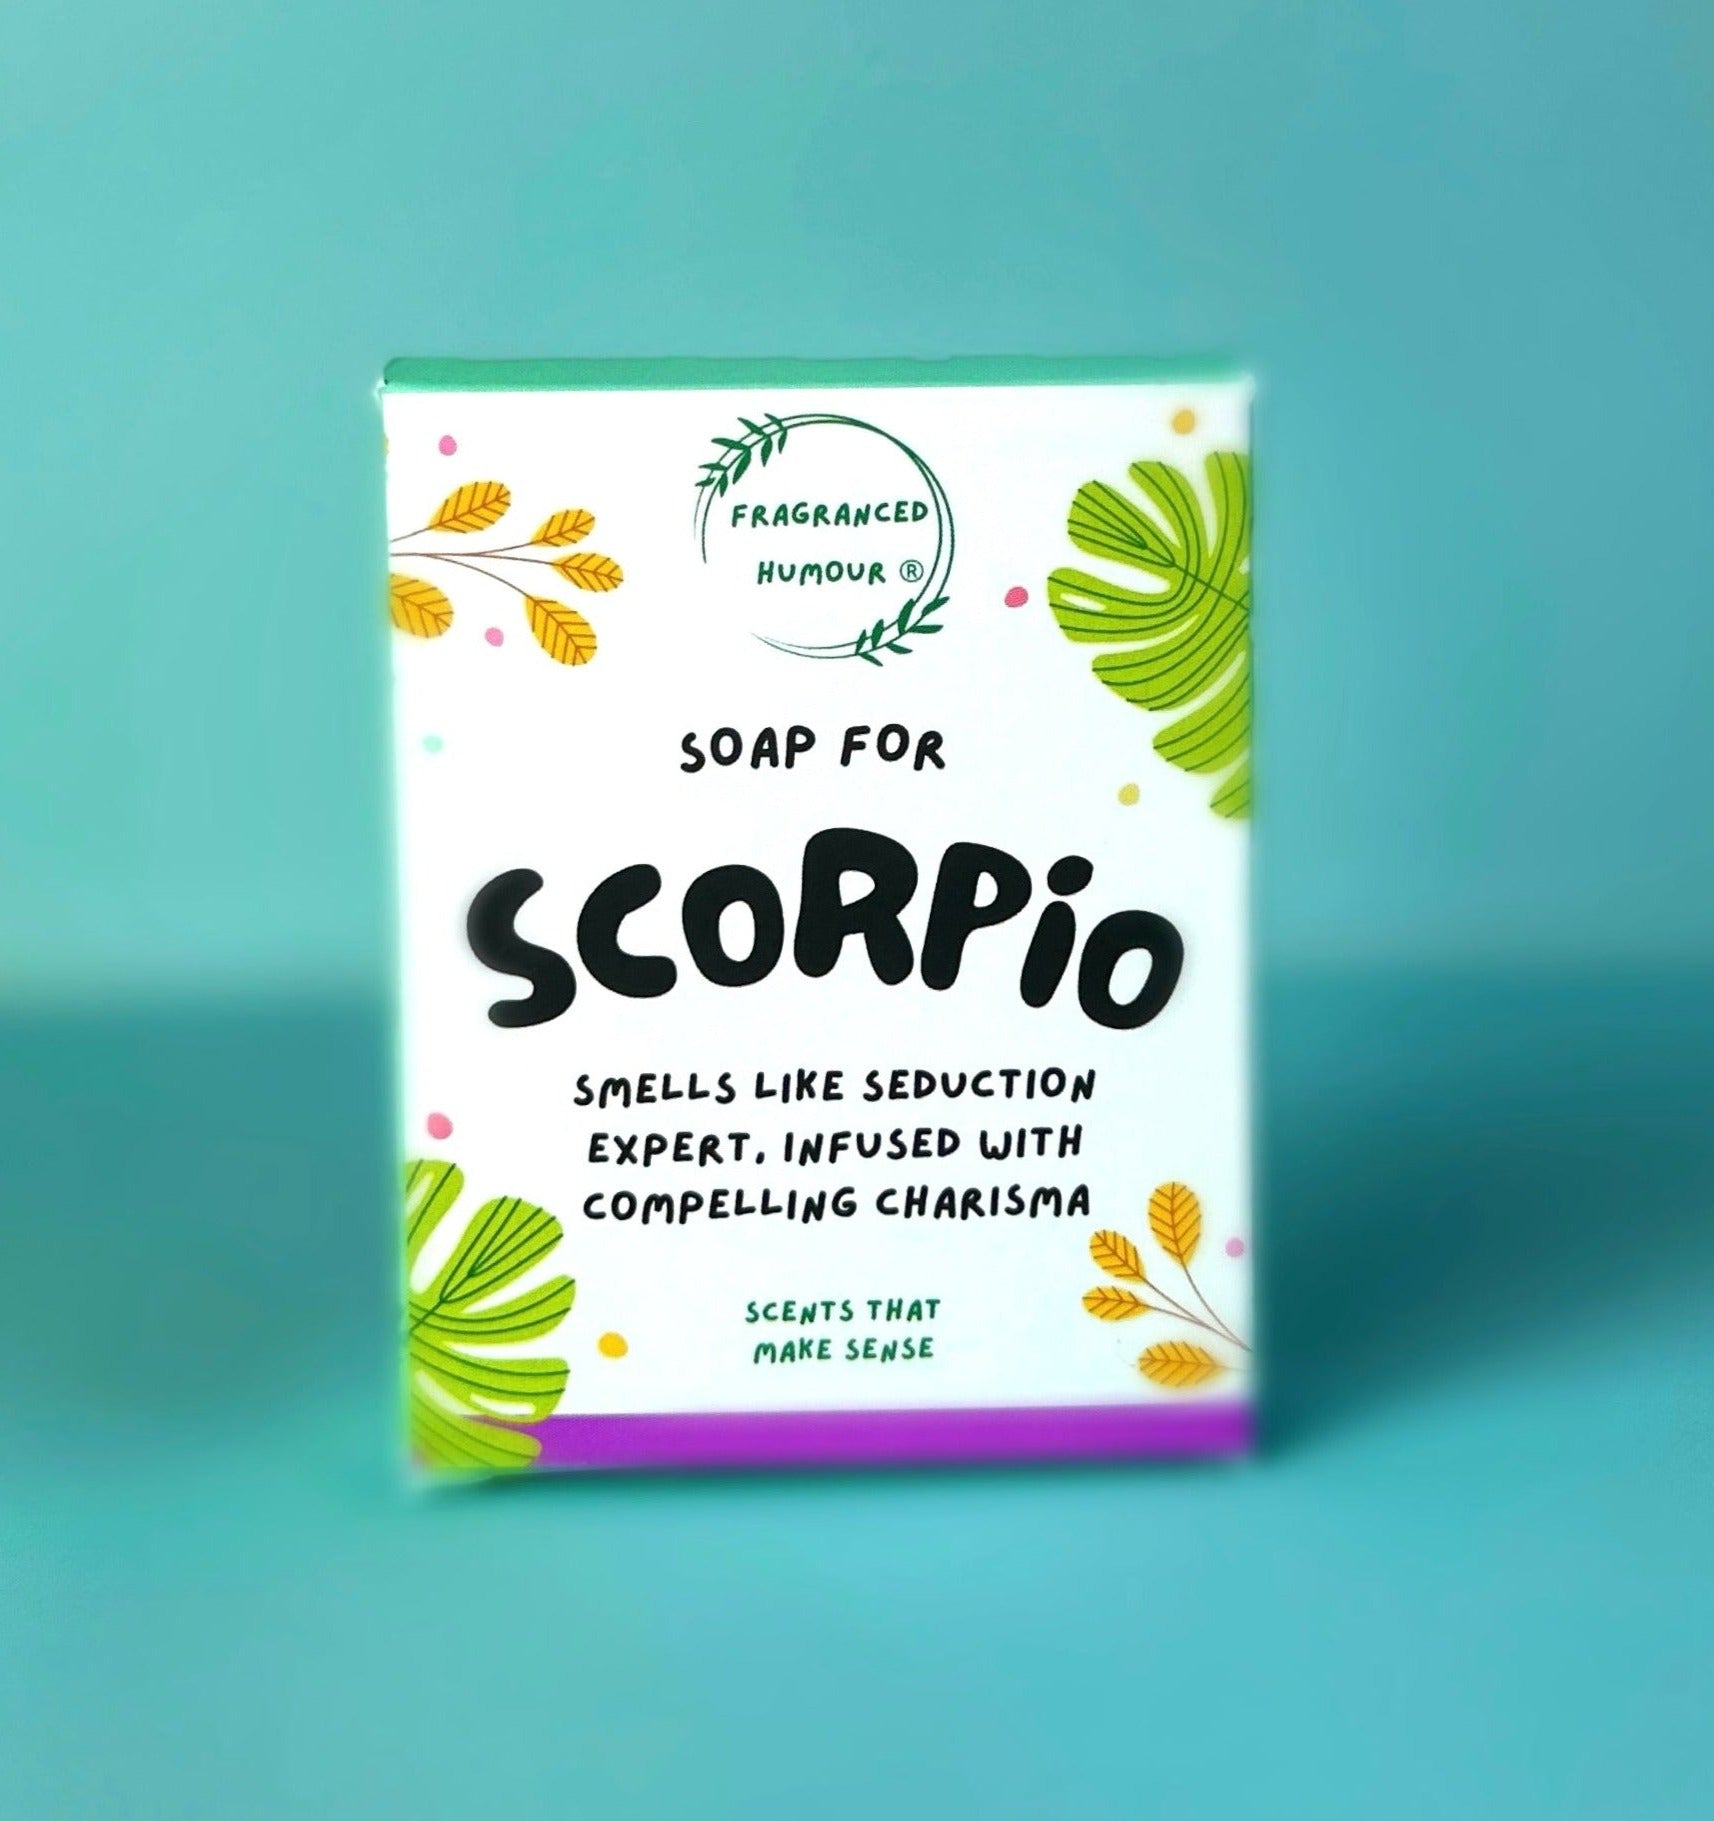 scorpio birthday gift for friends funny soap the text on the box reads soap for scorpio smells like seduction expert infused with compelling charisma